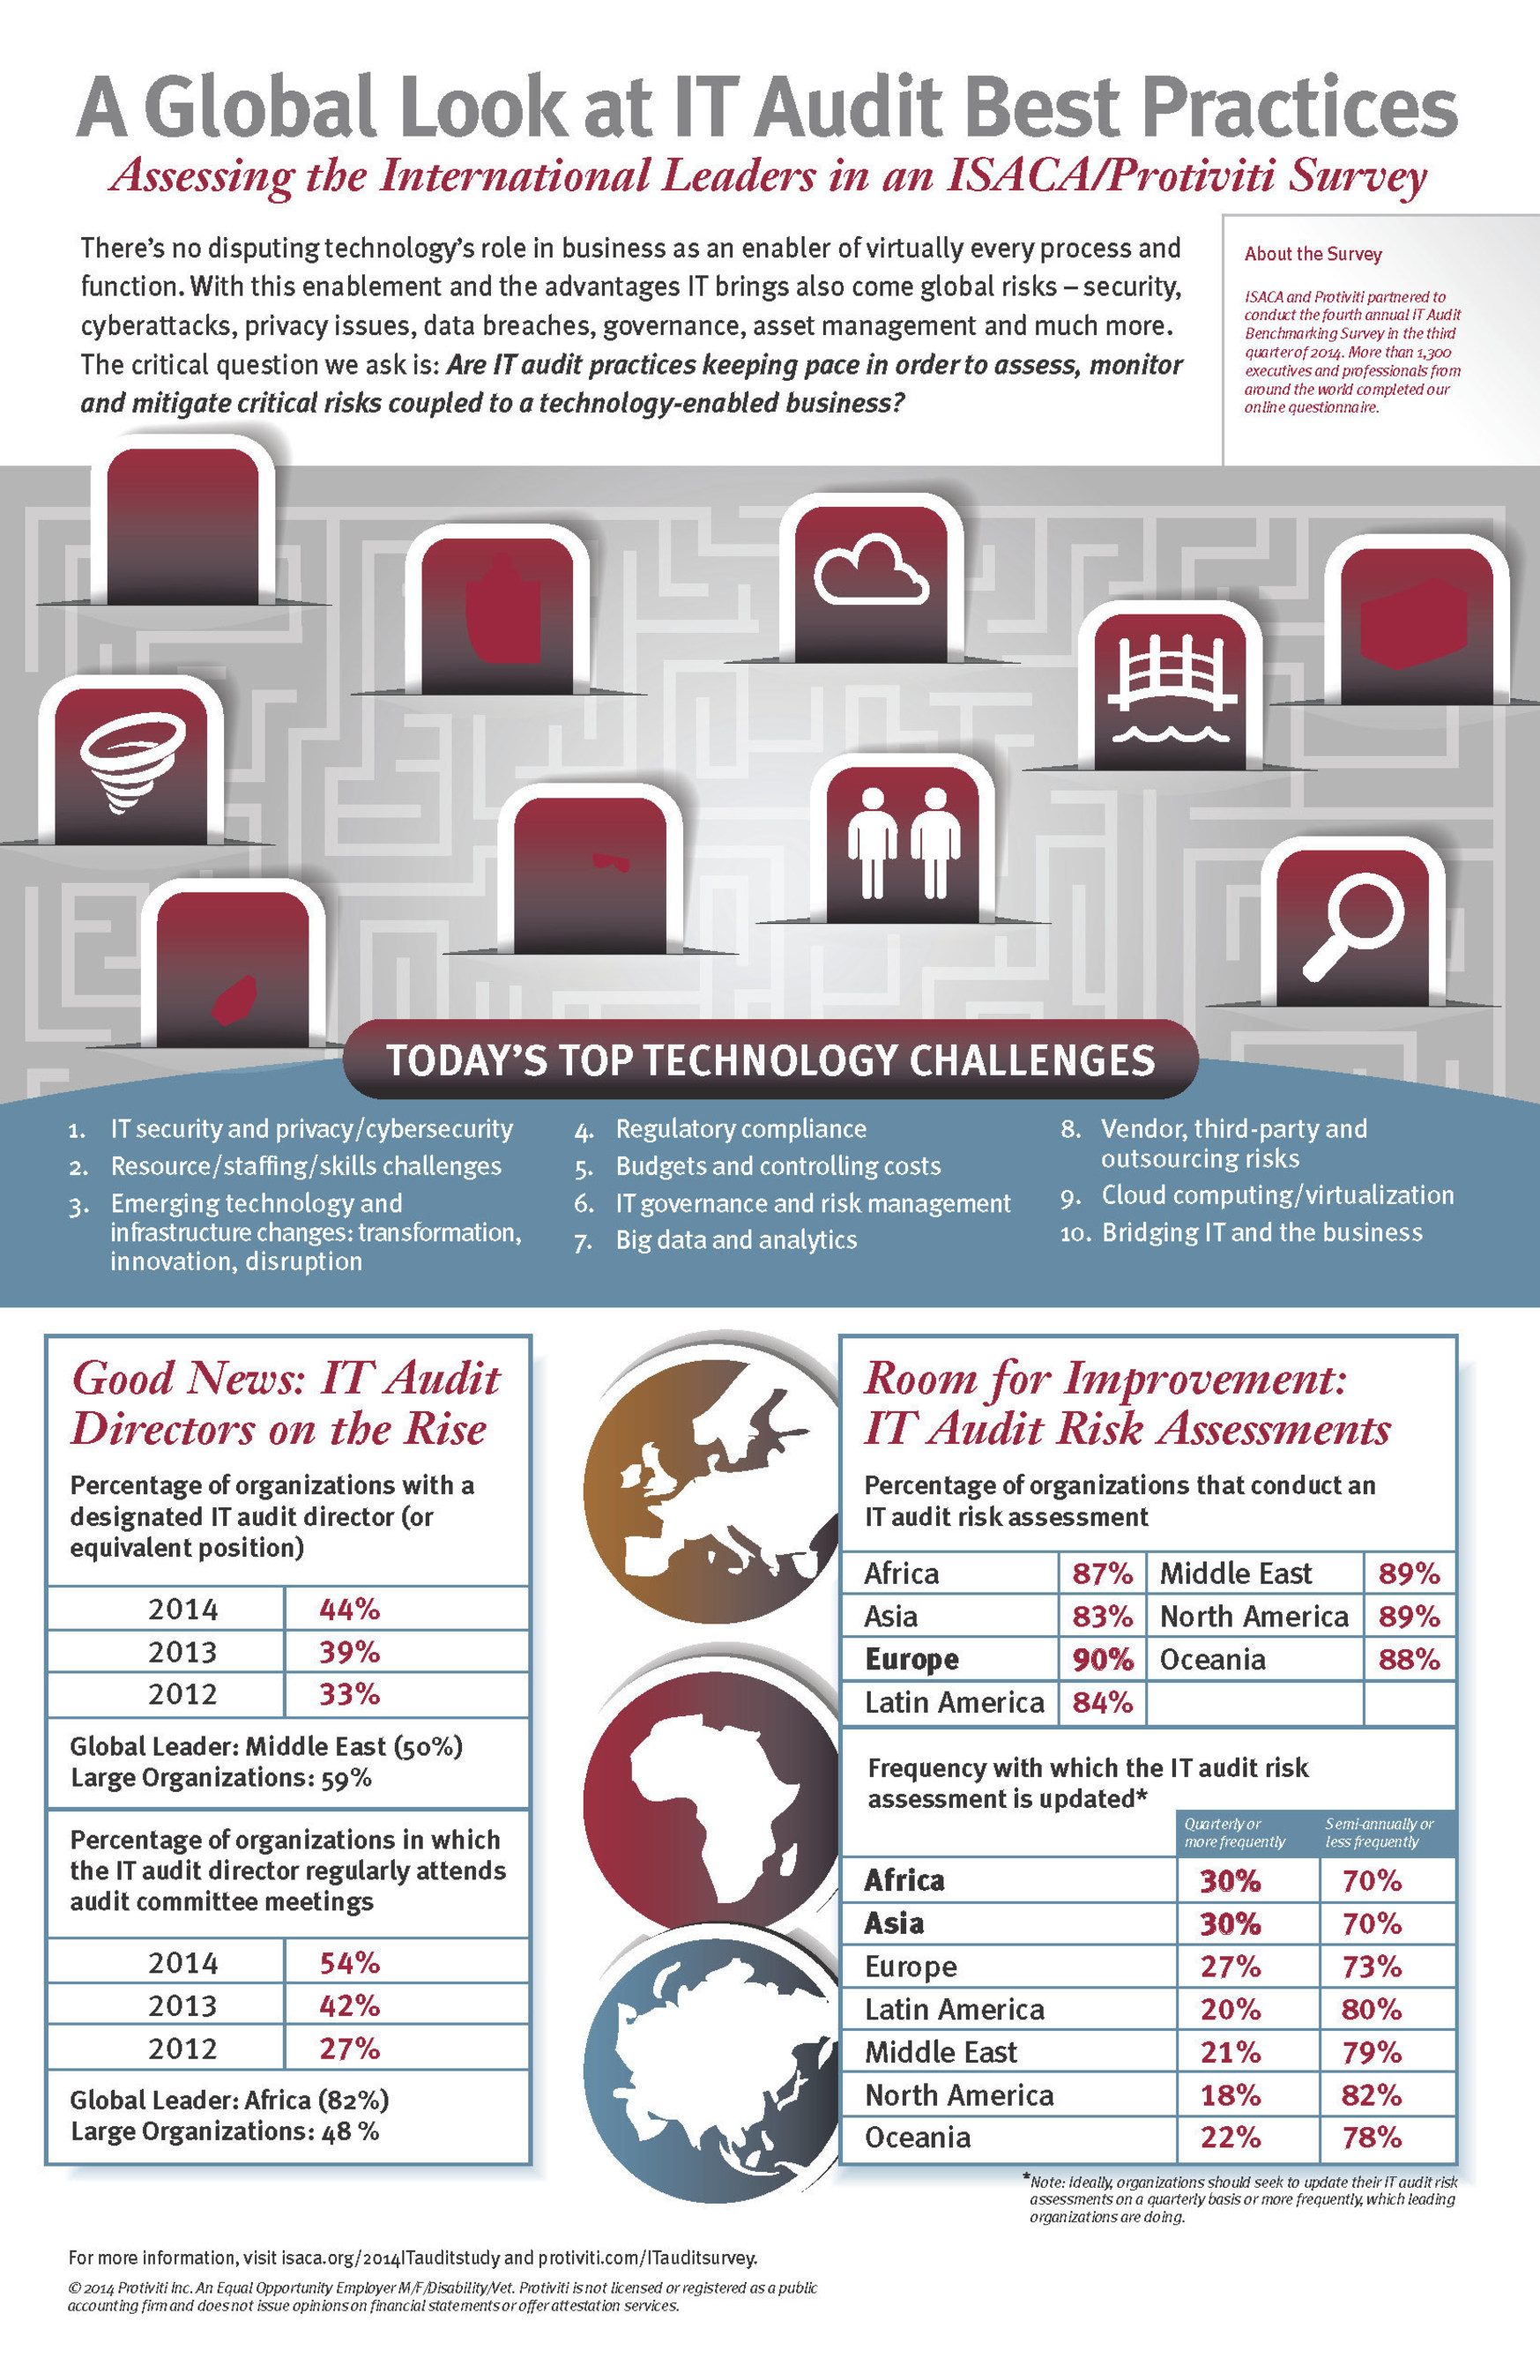 Although organizations have made strides in establishing best practices for the IT audit function, many are struggling to keep pace with global IT risks amid rapidly changing technology environments, according to a survey from global consulting firm Protiviti (www.protiviti.com) and global IT association ISACA (www.isaca.org). There is no disputing technology's role in business today as an enabler of virtually every process and function. With this enablement and the advantages IT brings also come global risks. The critical question we ask is: Are IT audit practices keeping pace to assess, monitor and mitigate critical risks coupled to a technology-enabled business?